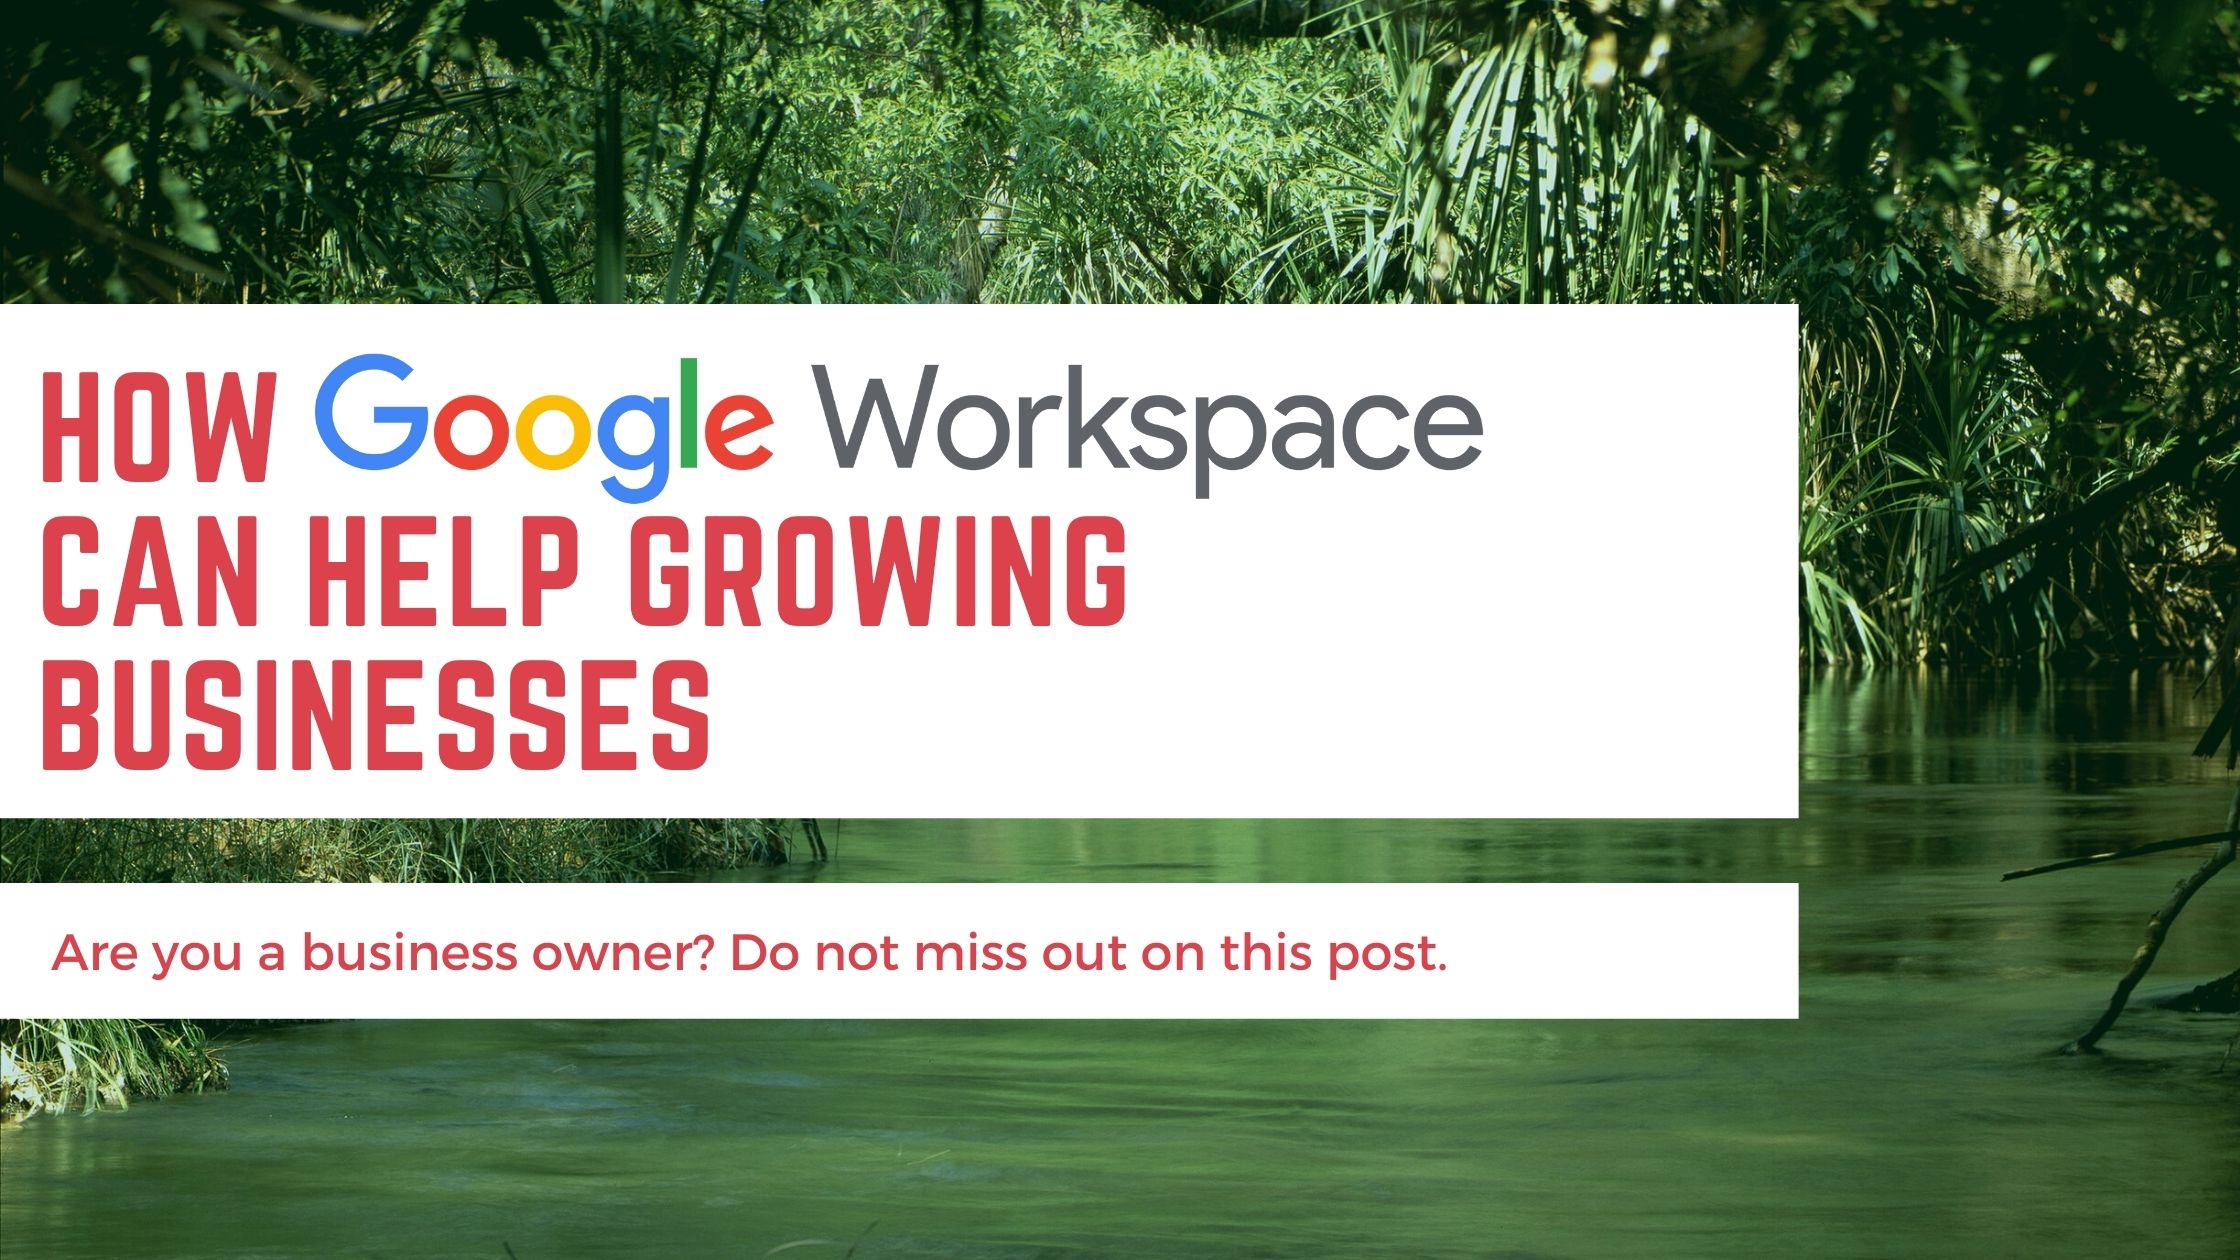 Google Workspace for Growing Businesses